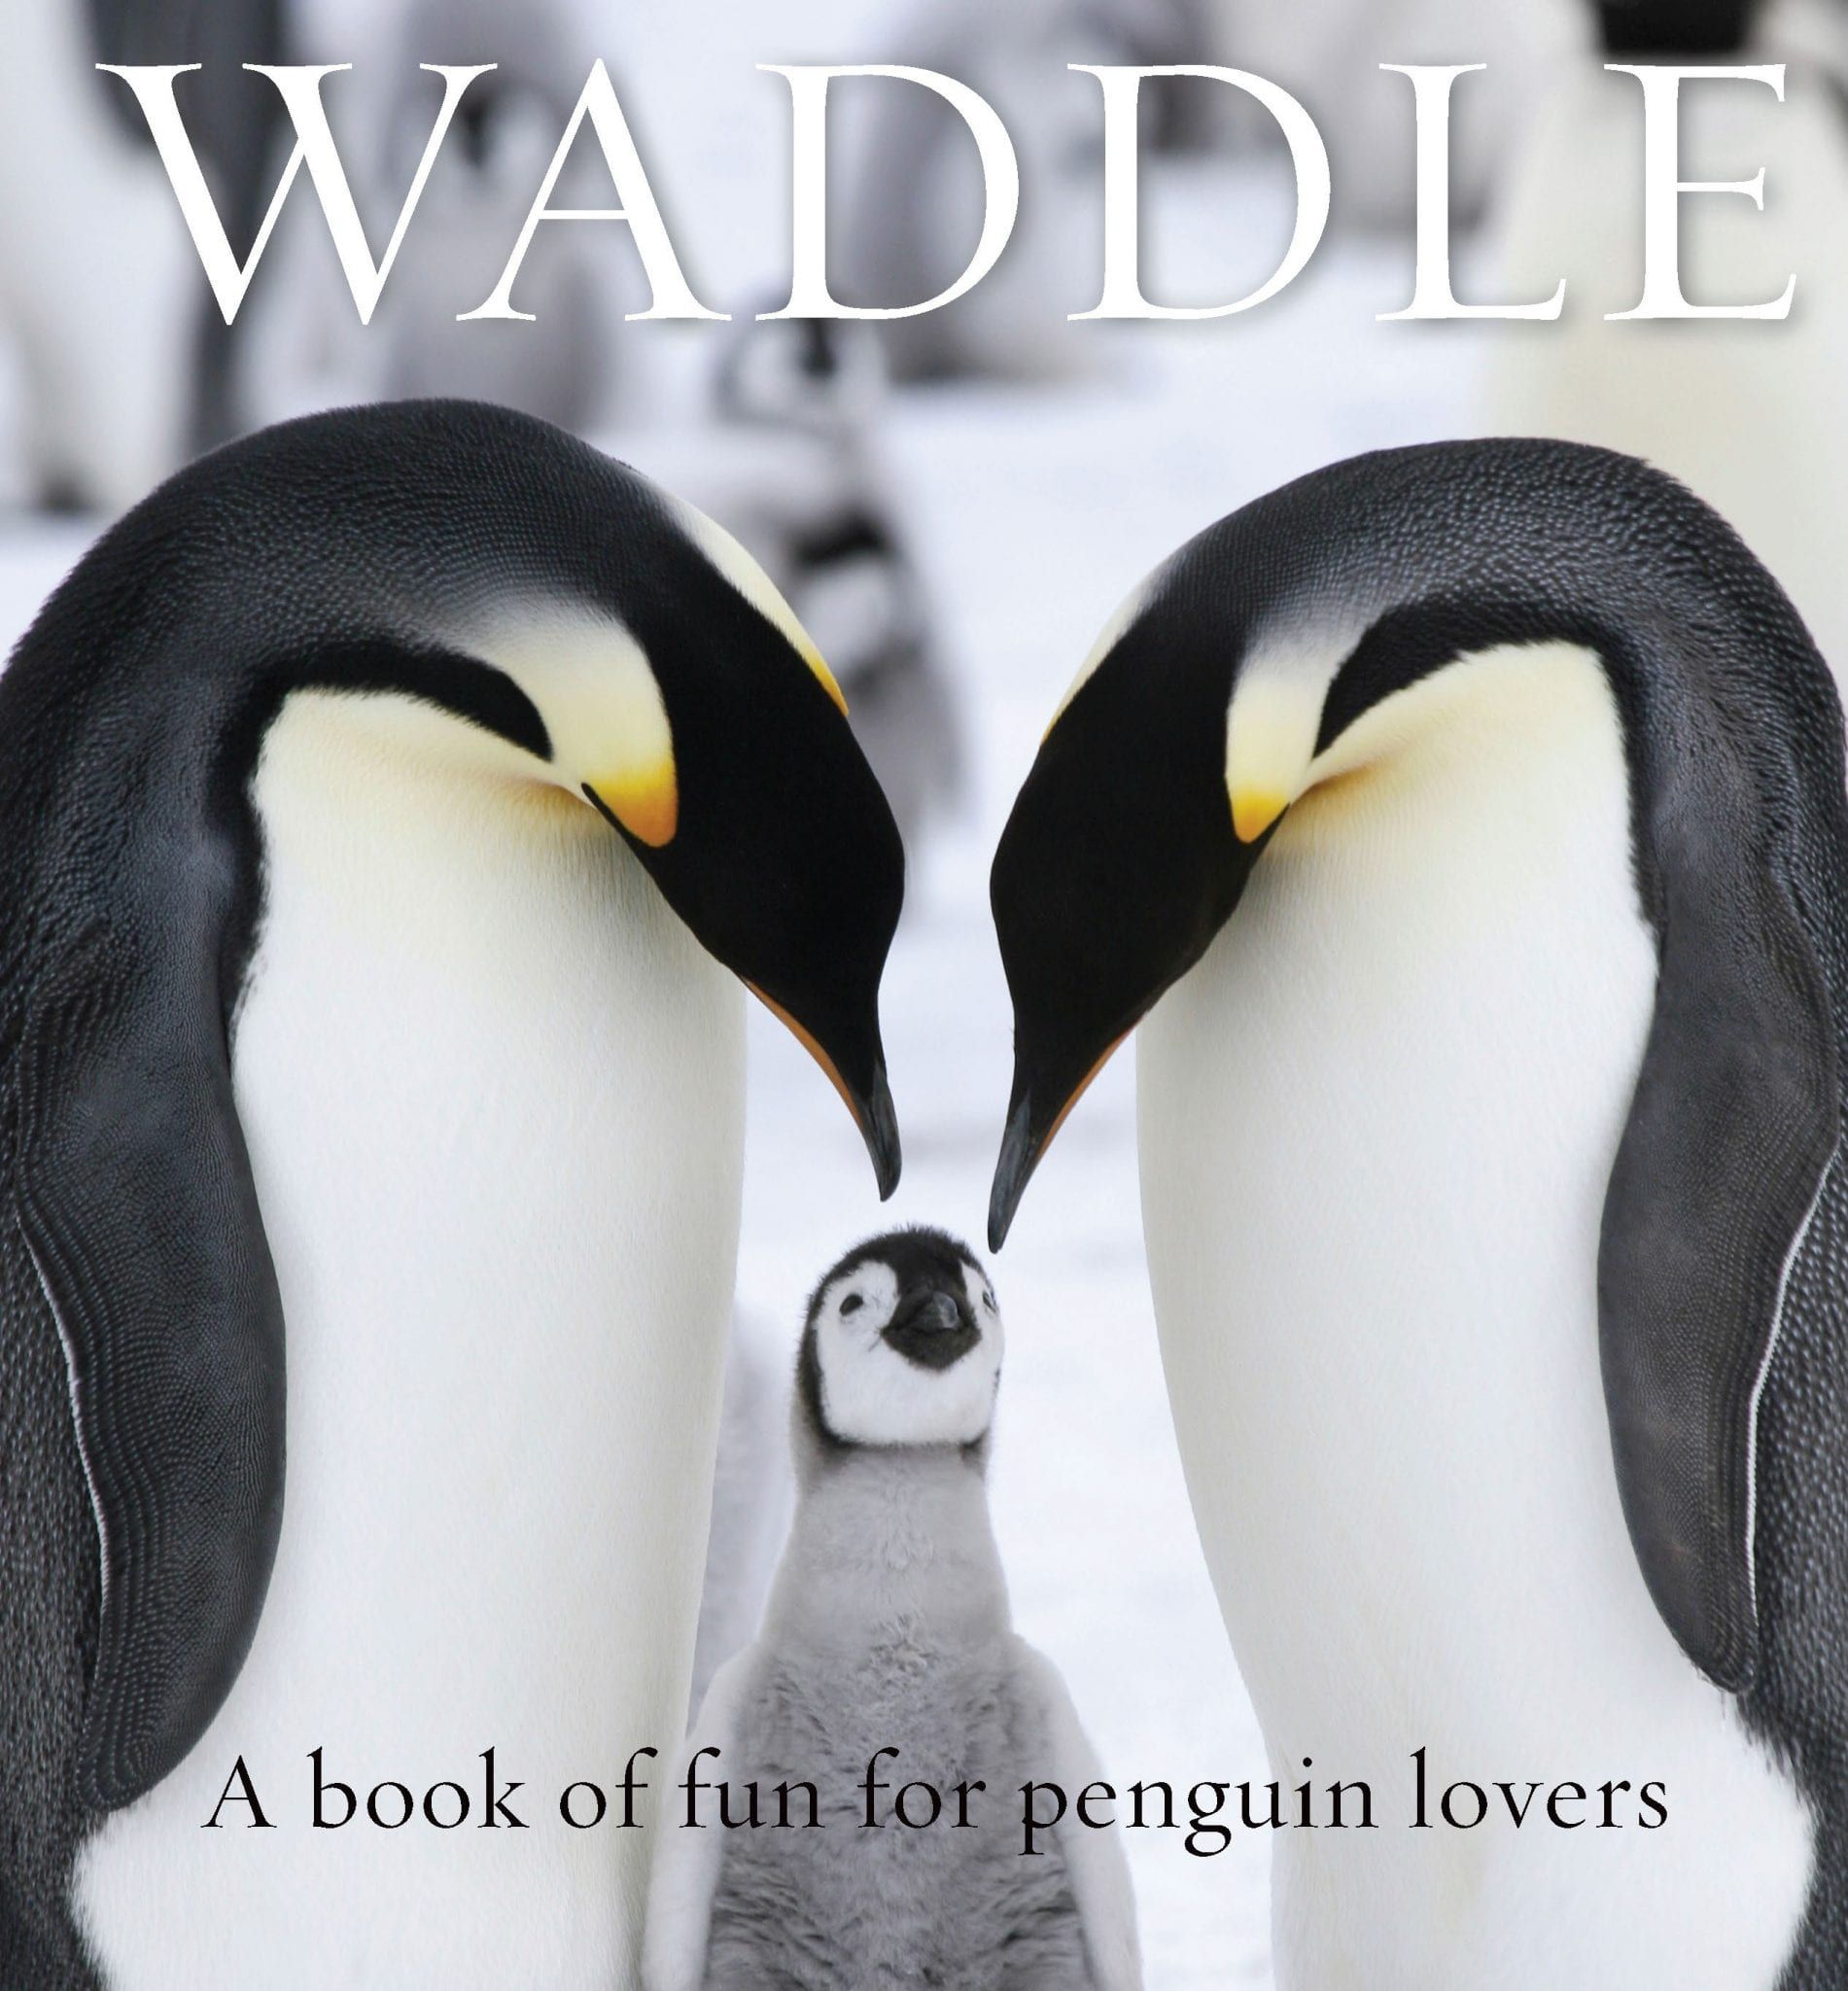 a book of fun for penguin lovers called waddle